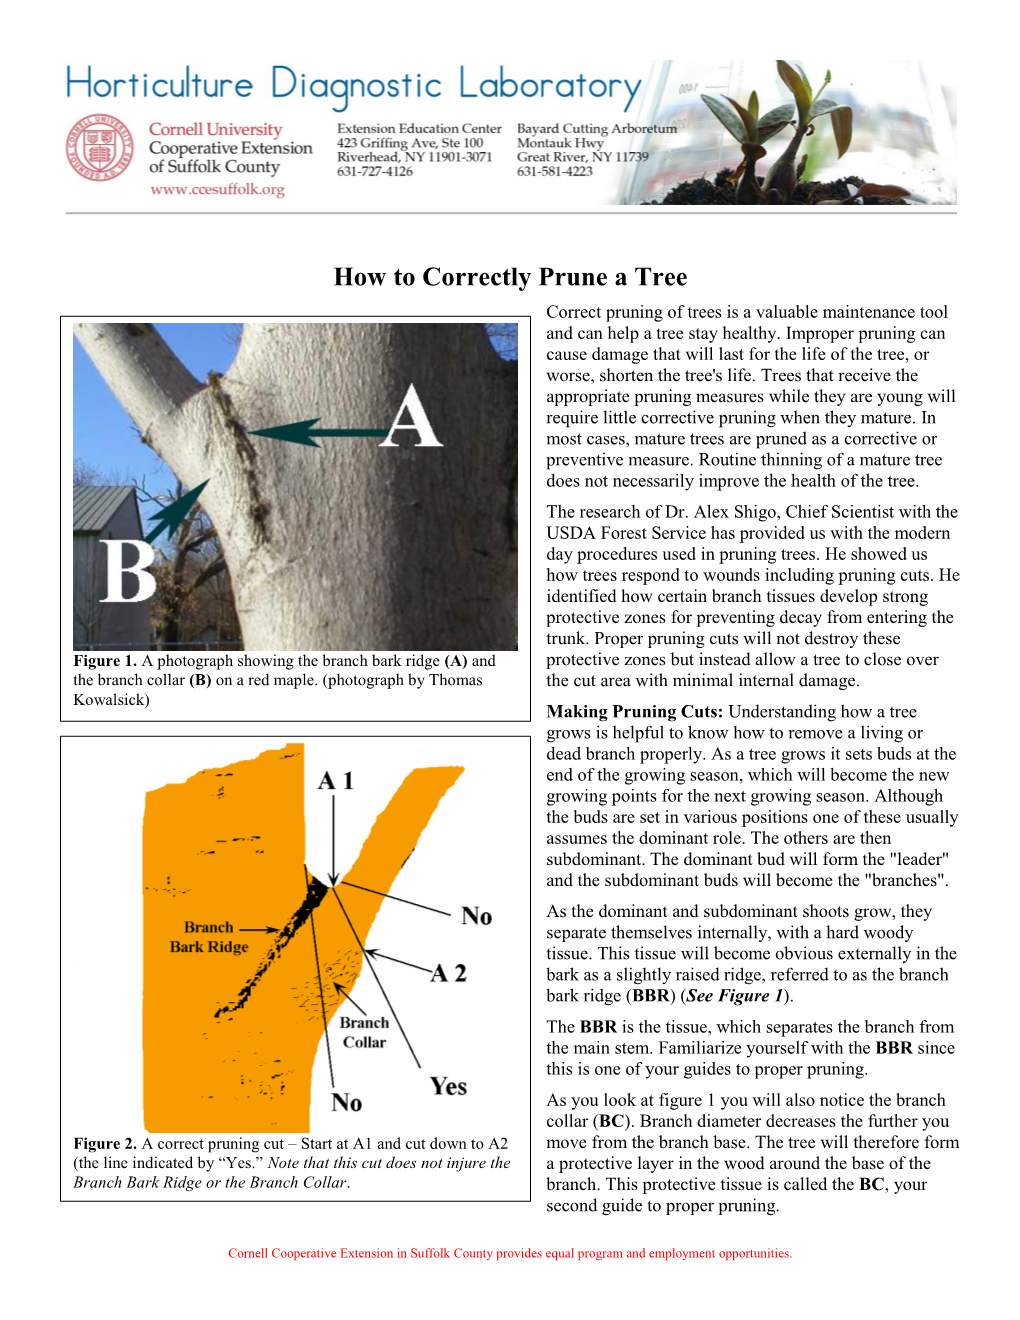 How to Correctly Prune a Tree Correct Pruning of Trees Is a Valuable Maintenance Tool and Can Help a Tree Stay Healthy